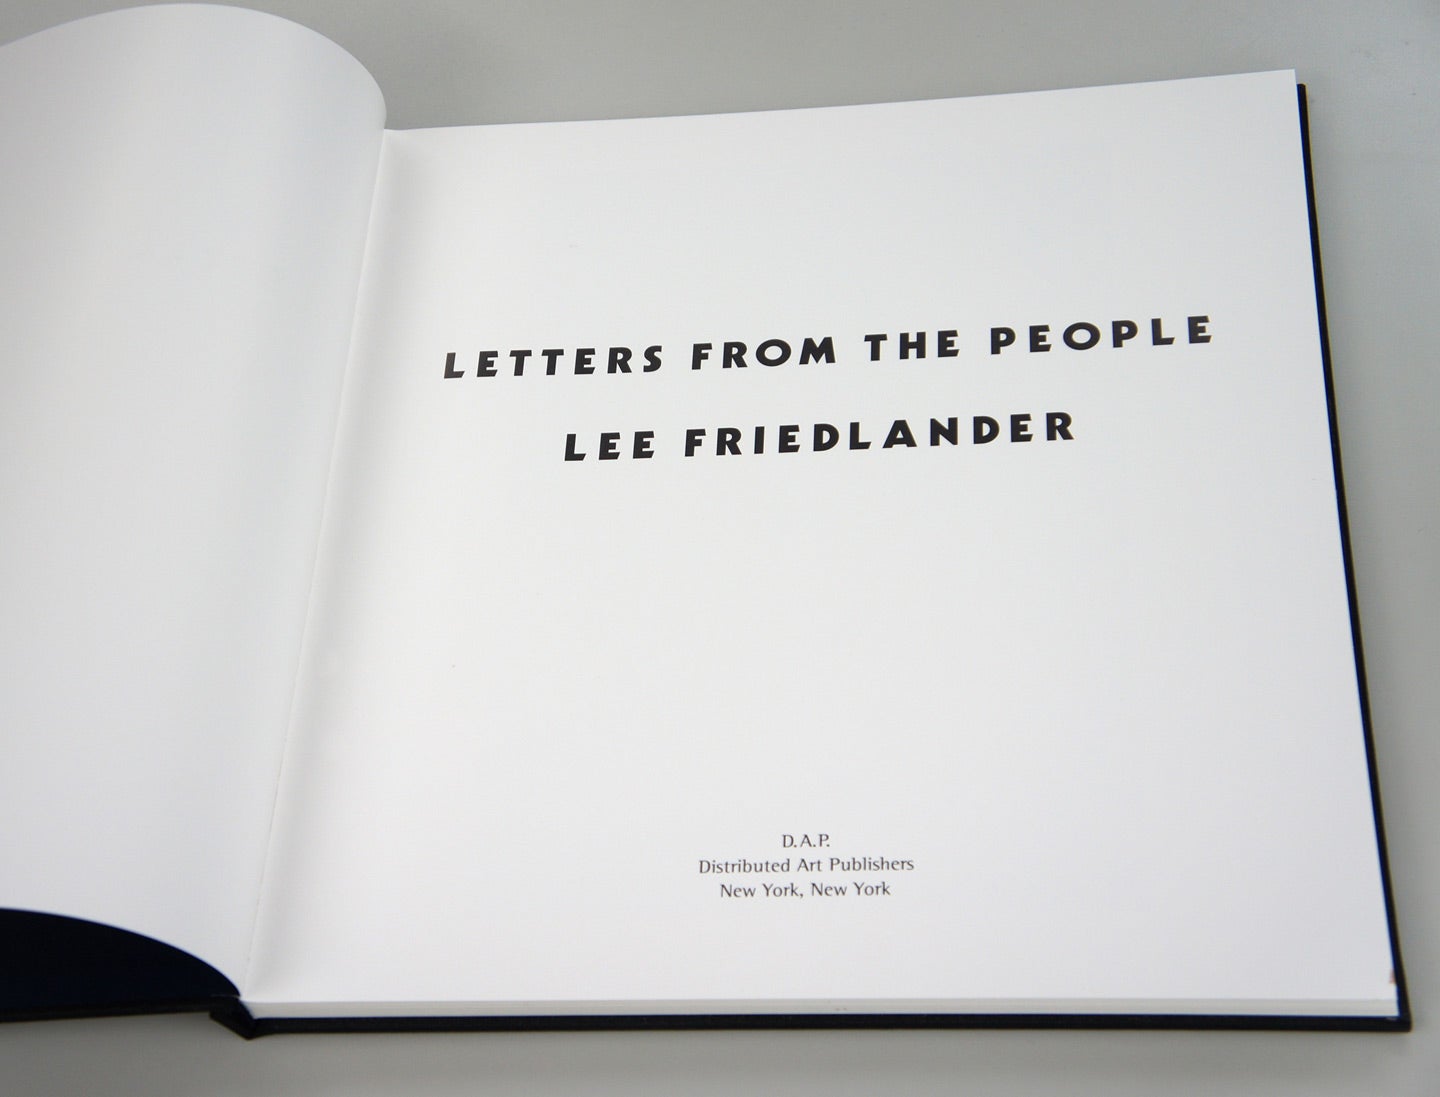 Lee Friedlander: Letters from the People (Special Limited Edition with One Vintage Gelatin Silver Print: "N")